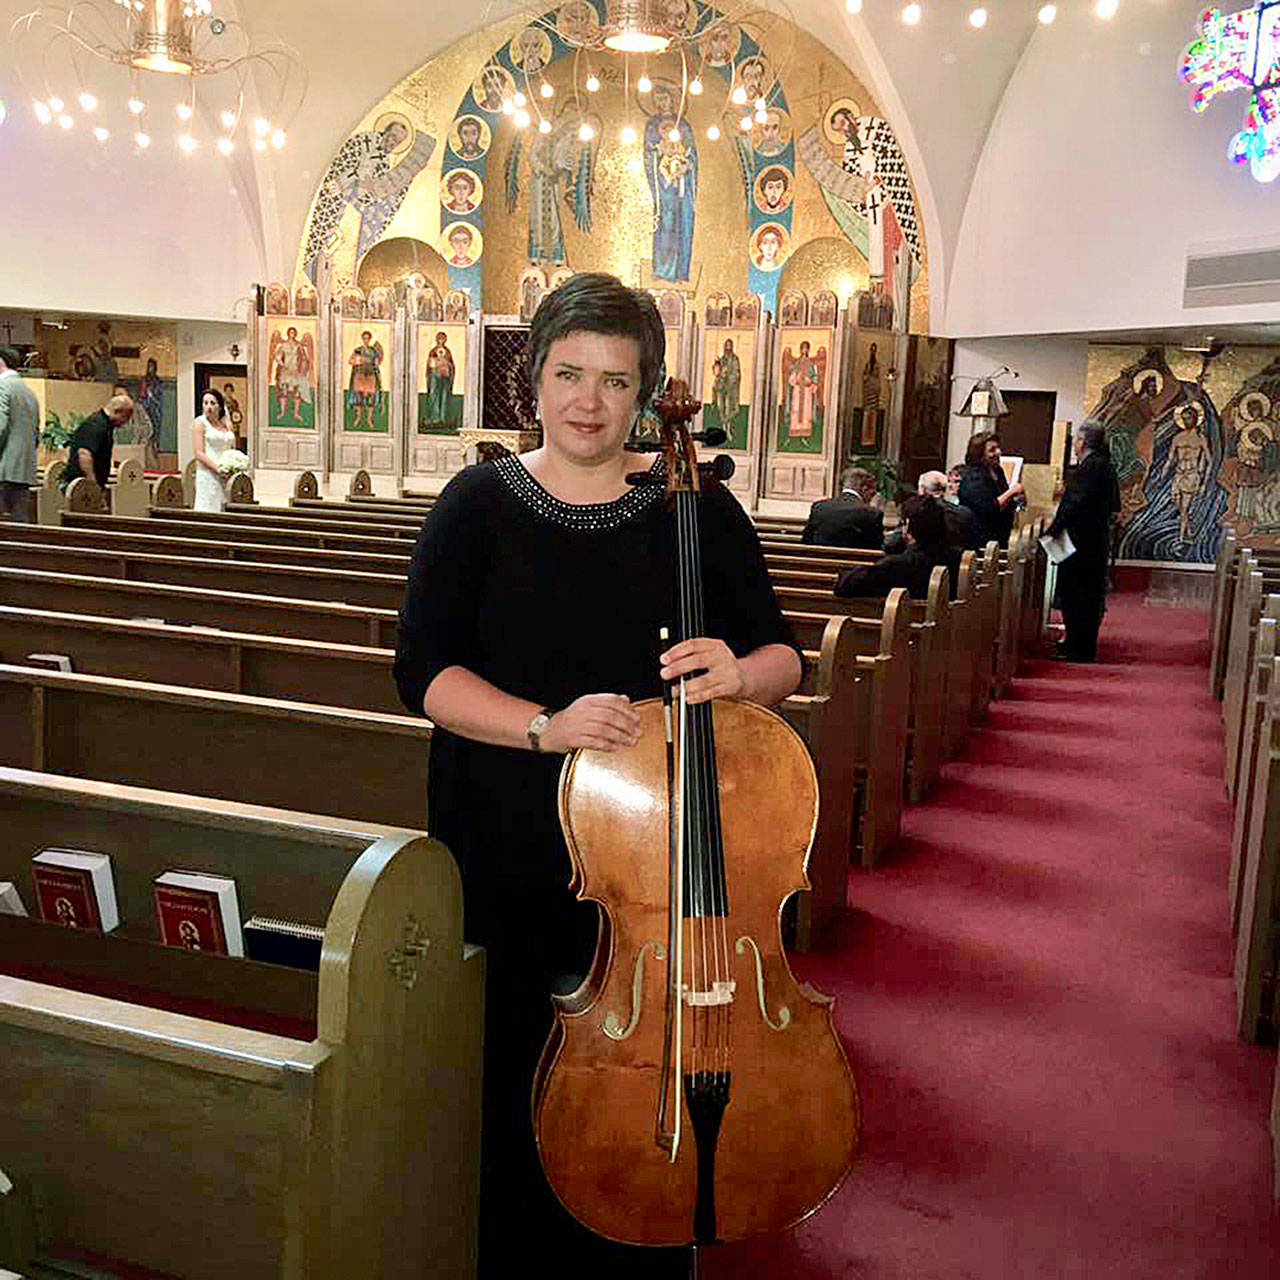 Olga Ruvinov will join with fellow cellists Meg Brennand, Page Smith, and Brian Wharton for a performance by CELLICATESSEN Seattle at the next First Sundays Concert. (Photo courtesy of First Sundays Concert)